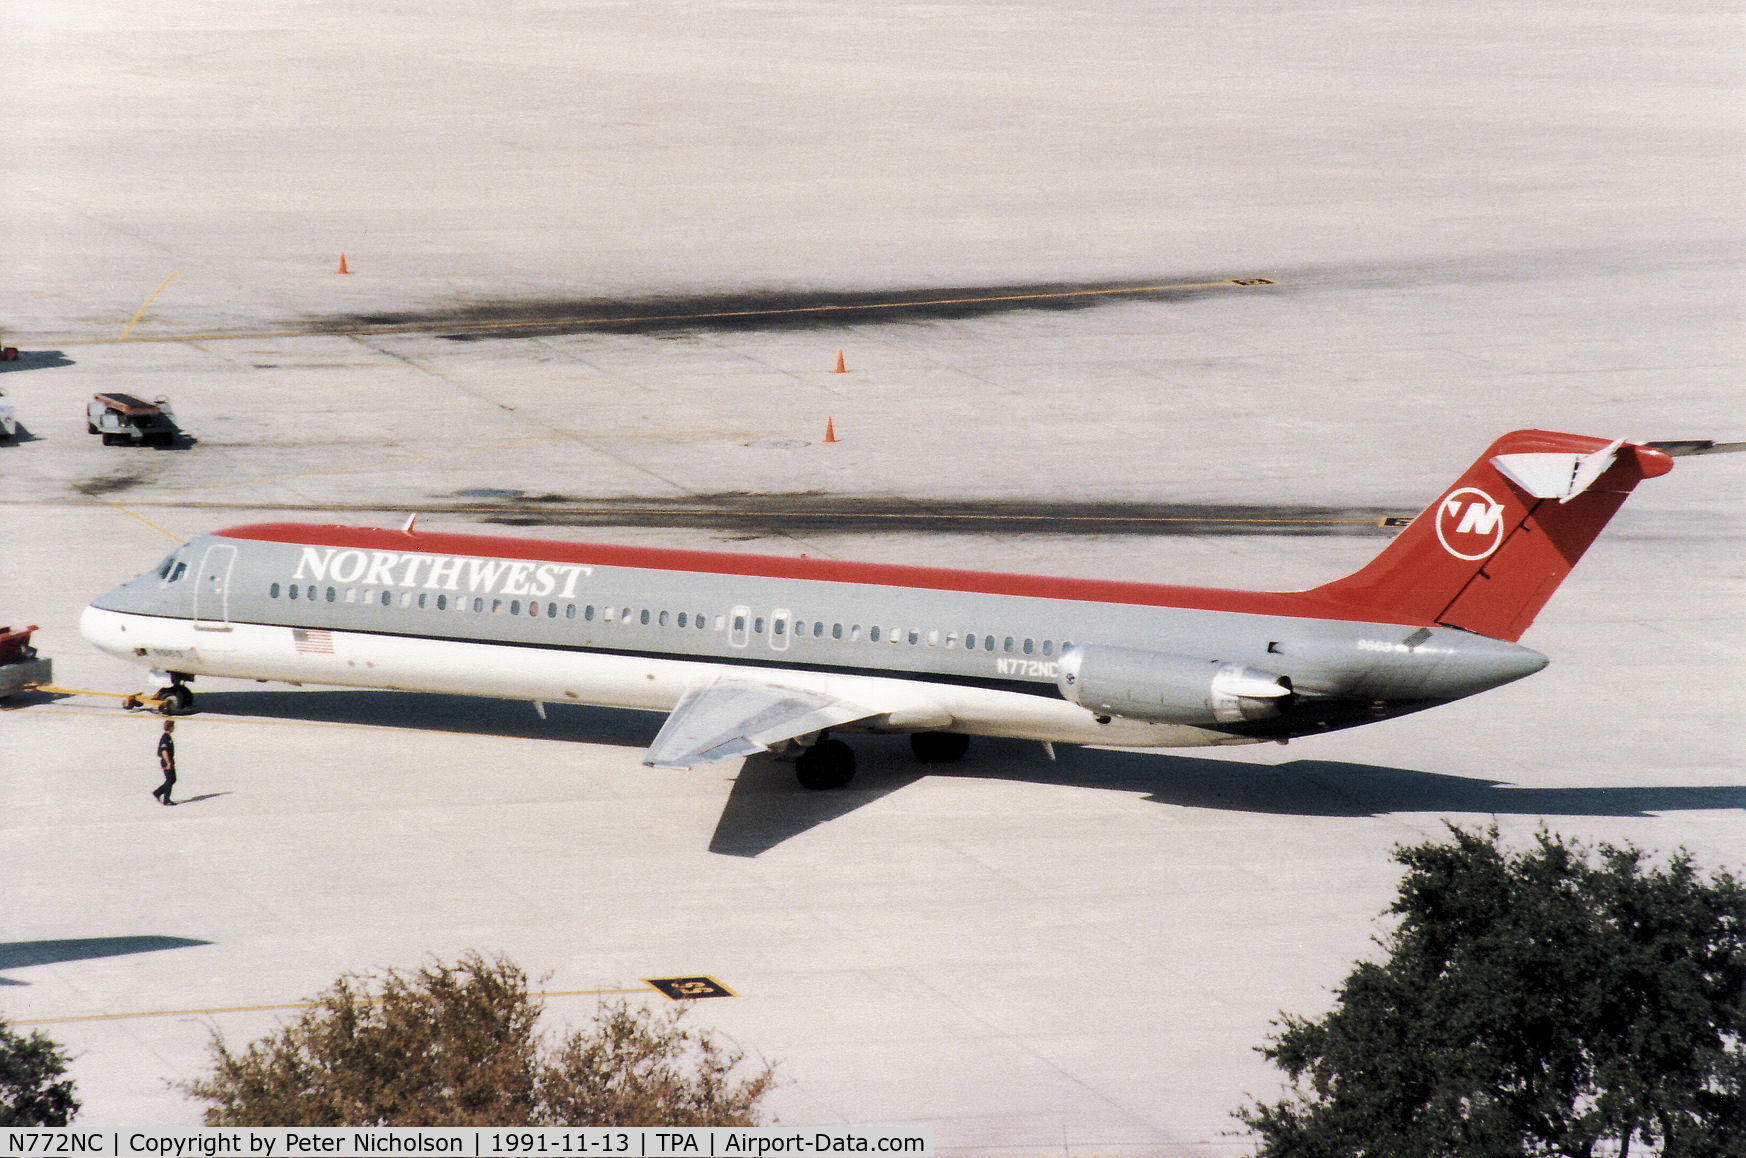 N772NC, 1978 McDonnell Douglas DC-9-51 C/N 47774, DC-9-51 of Northwest Airlines on push-back at Tampa in November 1991.